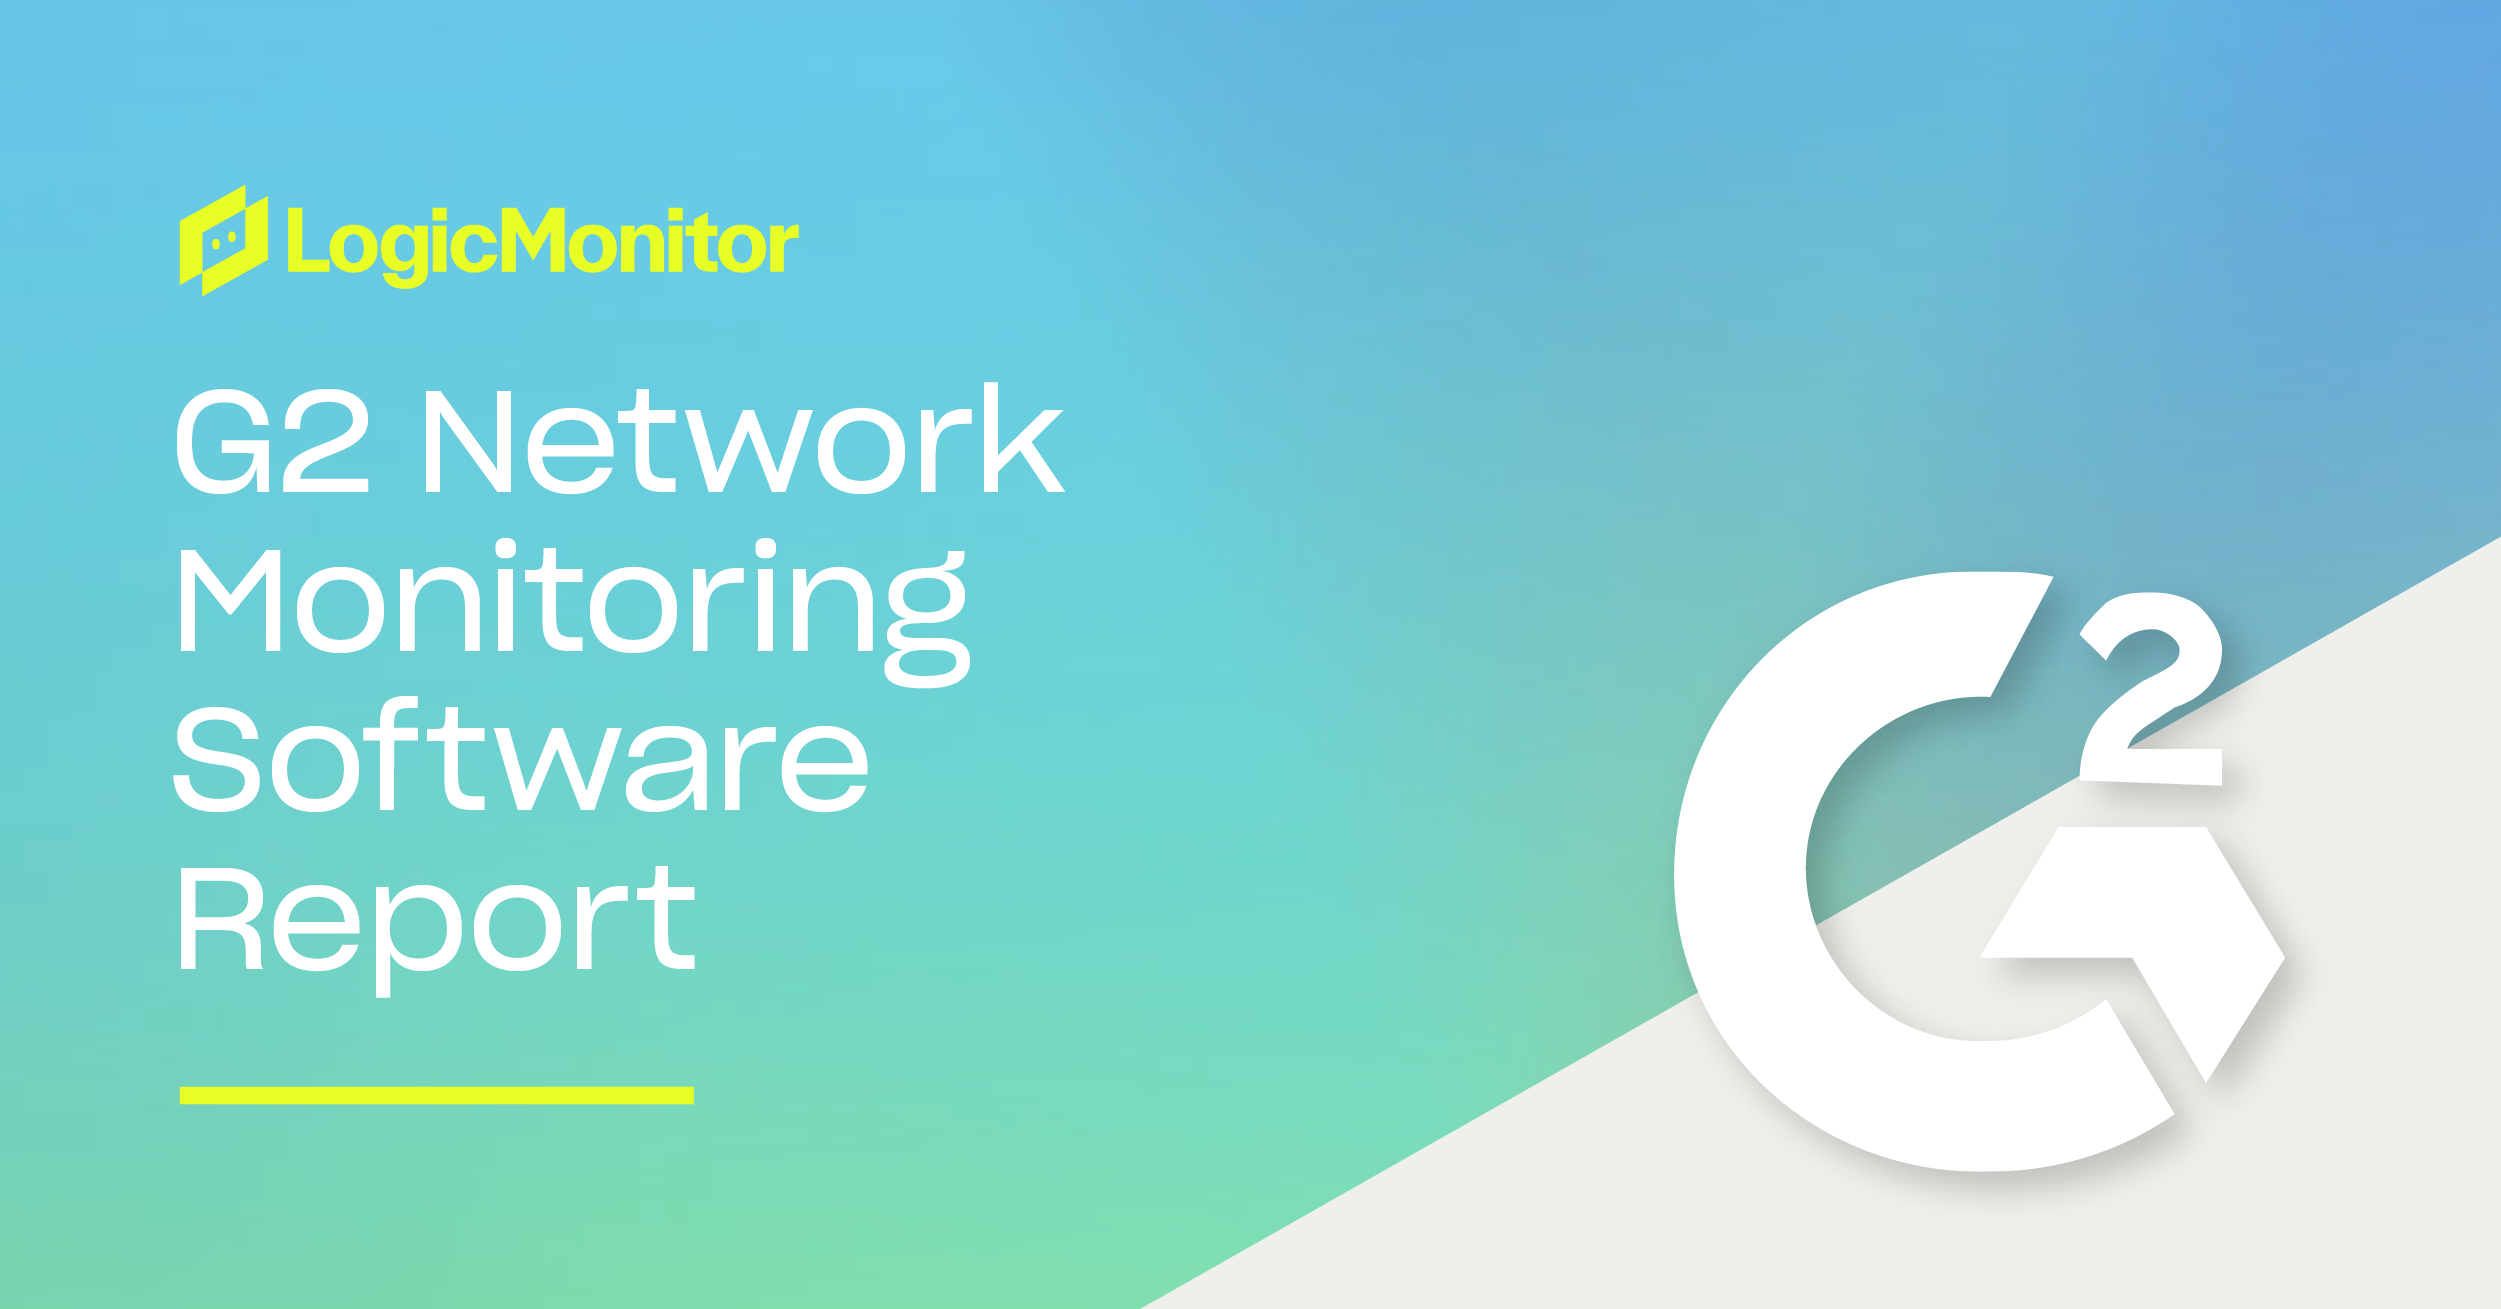 G2 Network Monitoring Software report